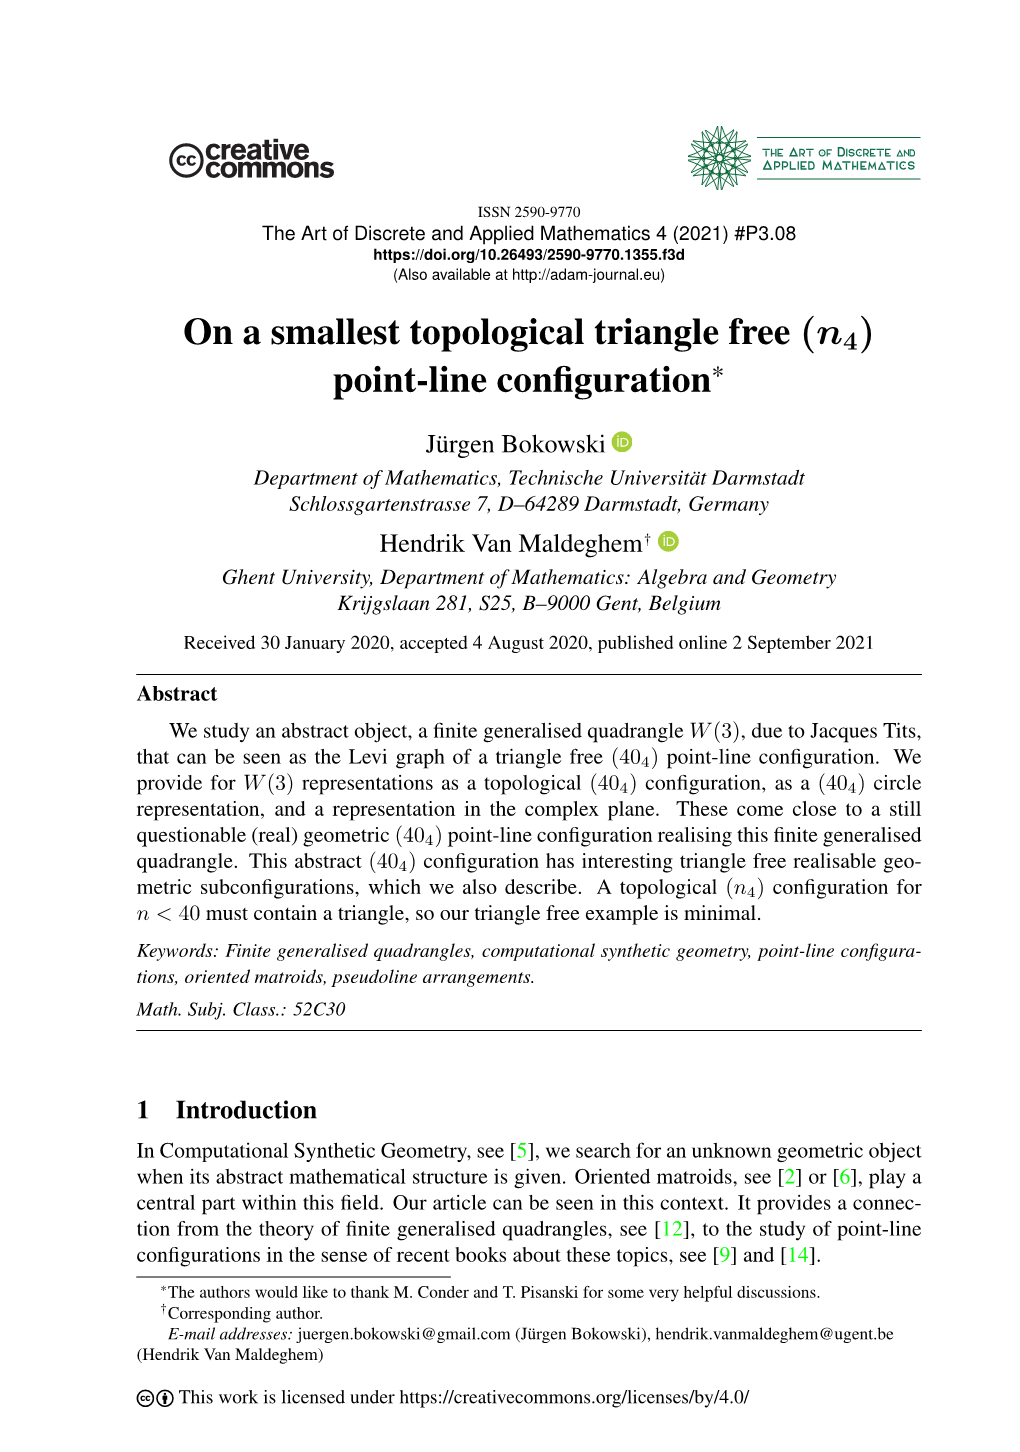 On a Smallest Topological Triangle Free (N Point-Line Configuration*